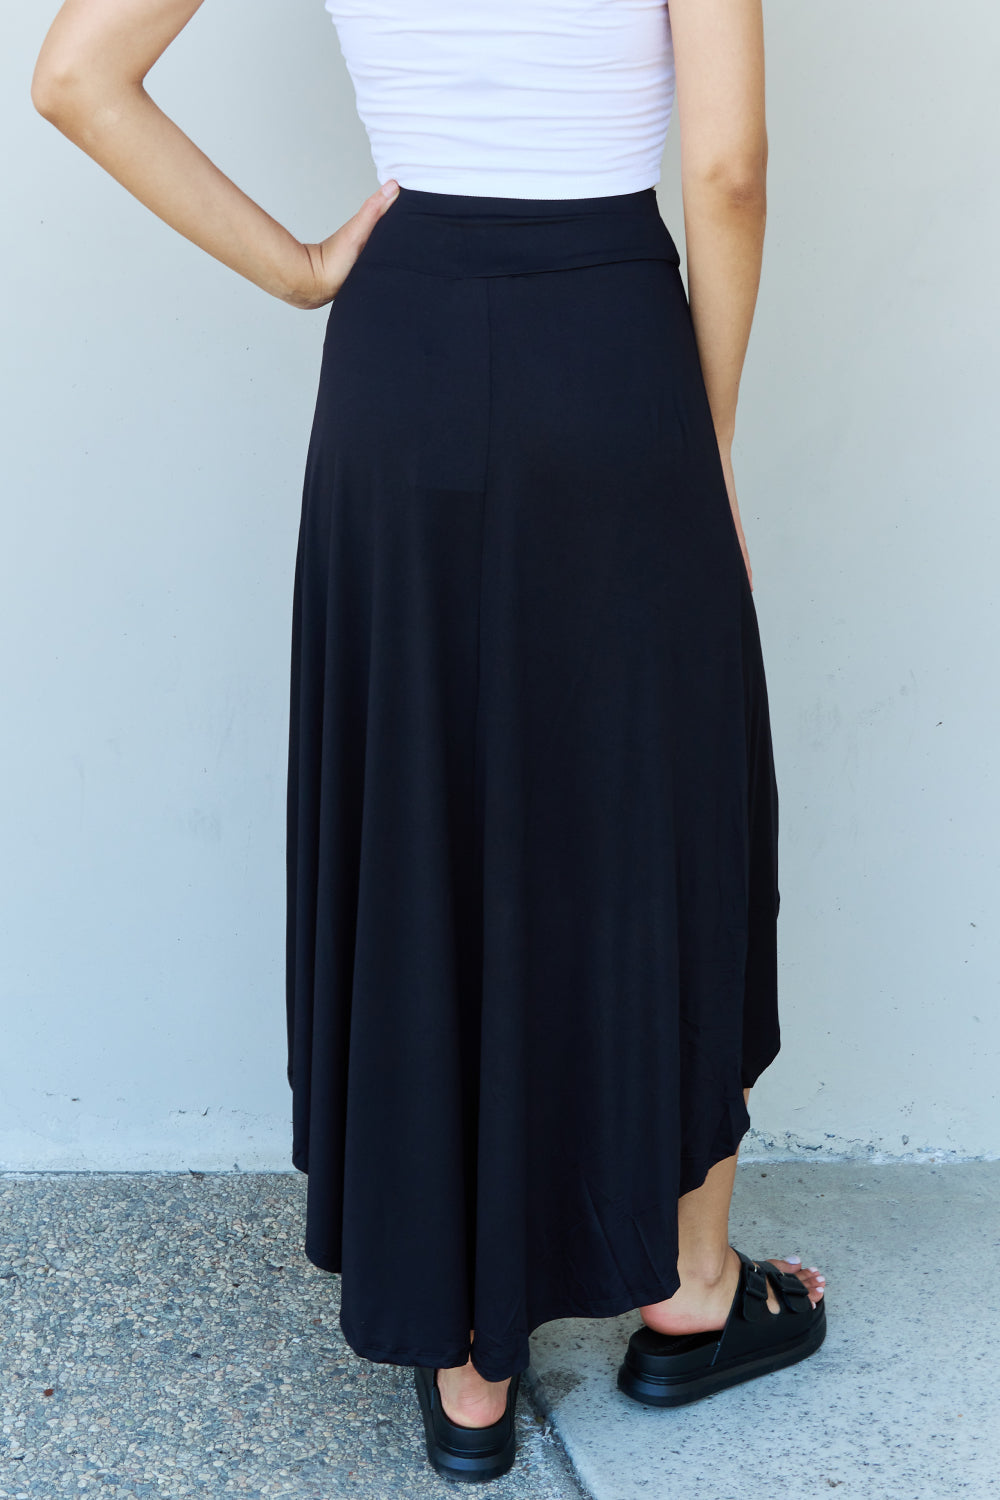 First Choice High Waisted Flare Maxi Skirt in Black - Bottoms - Skirts - 2 - 2024